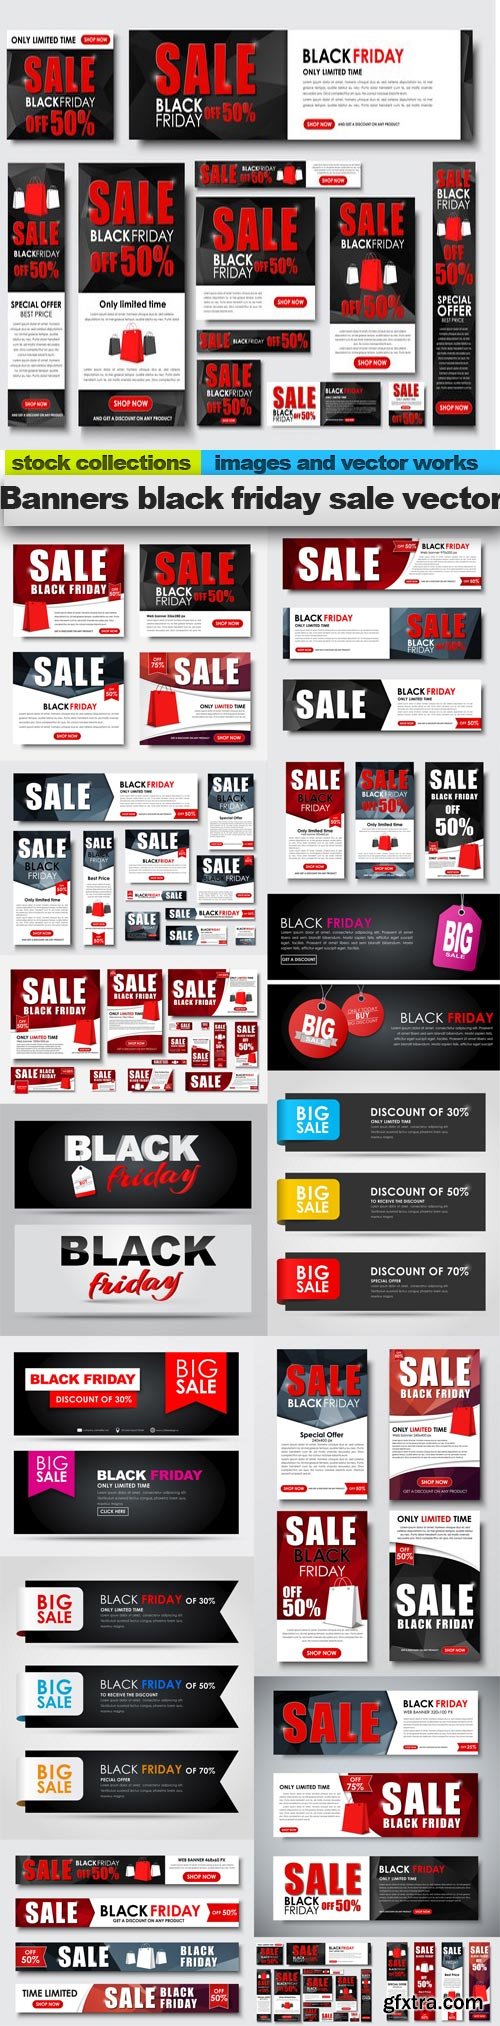 Banners black friday sale vector, 15 x EPS